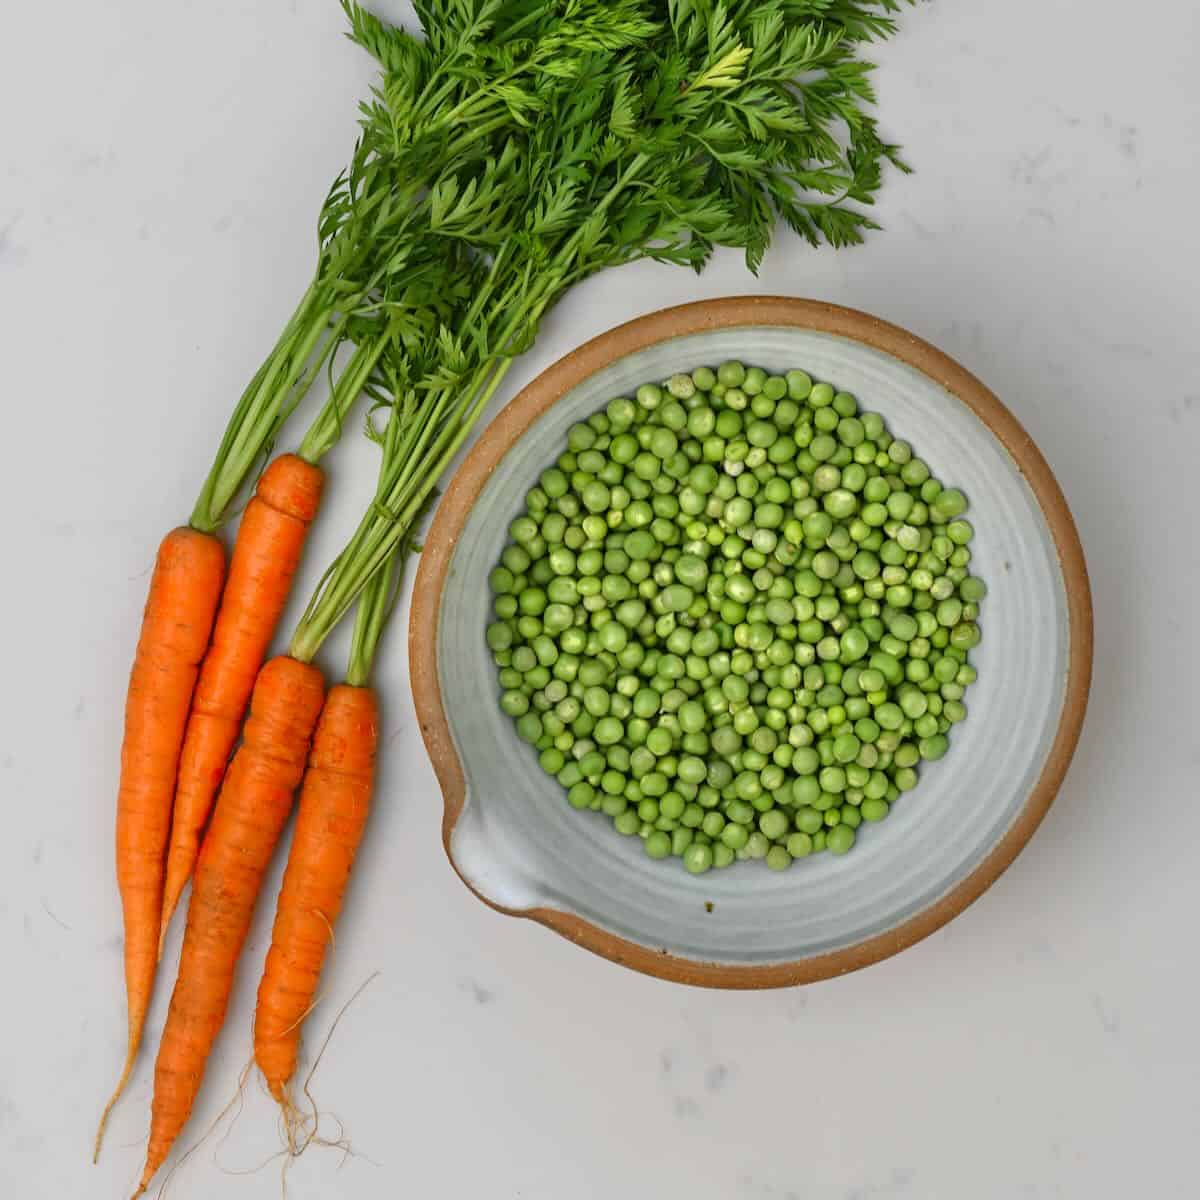 Carrots next to a bowl of peas